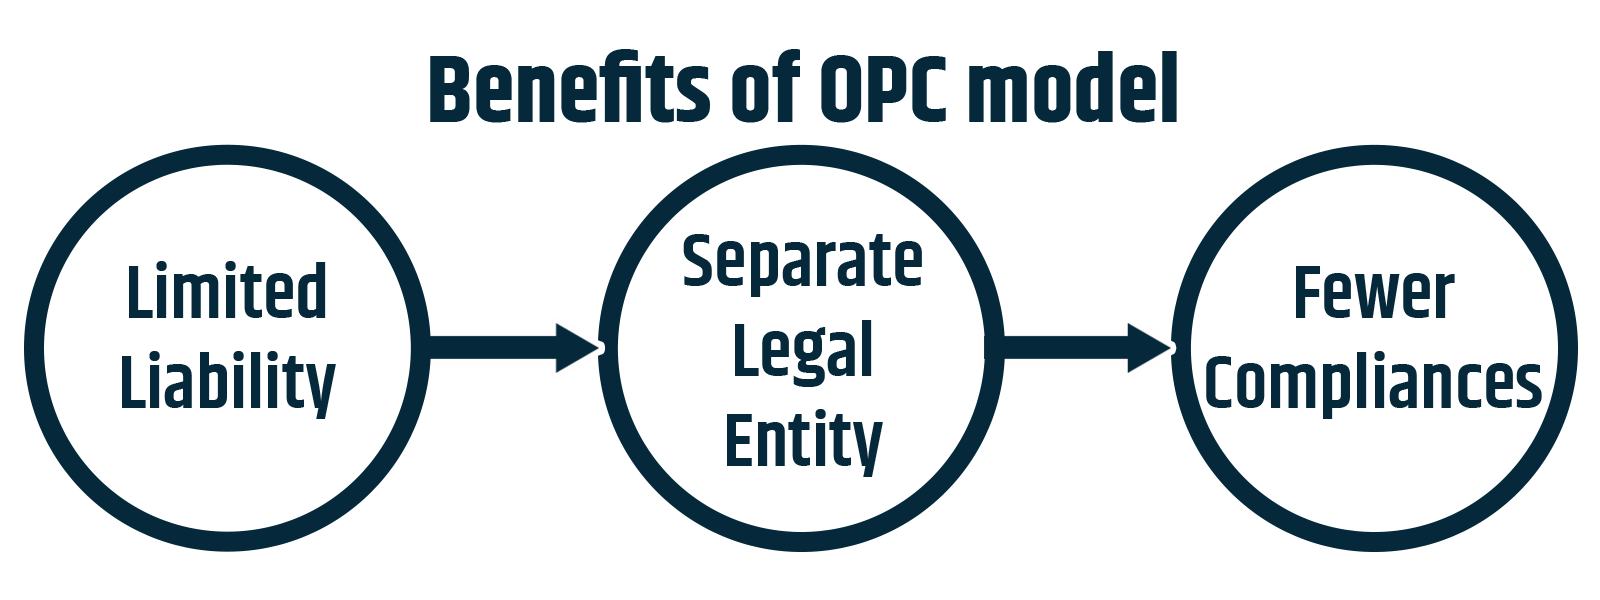 the benefits of opc model are limited liablity , separate legal entity, and fewer compliances